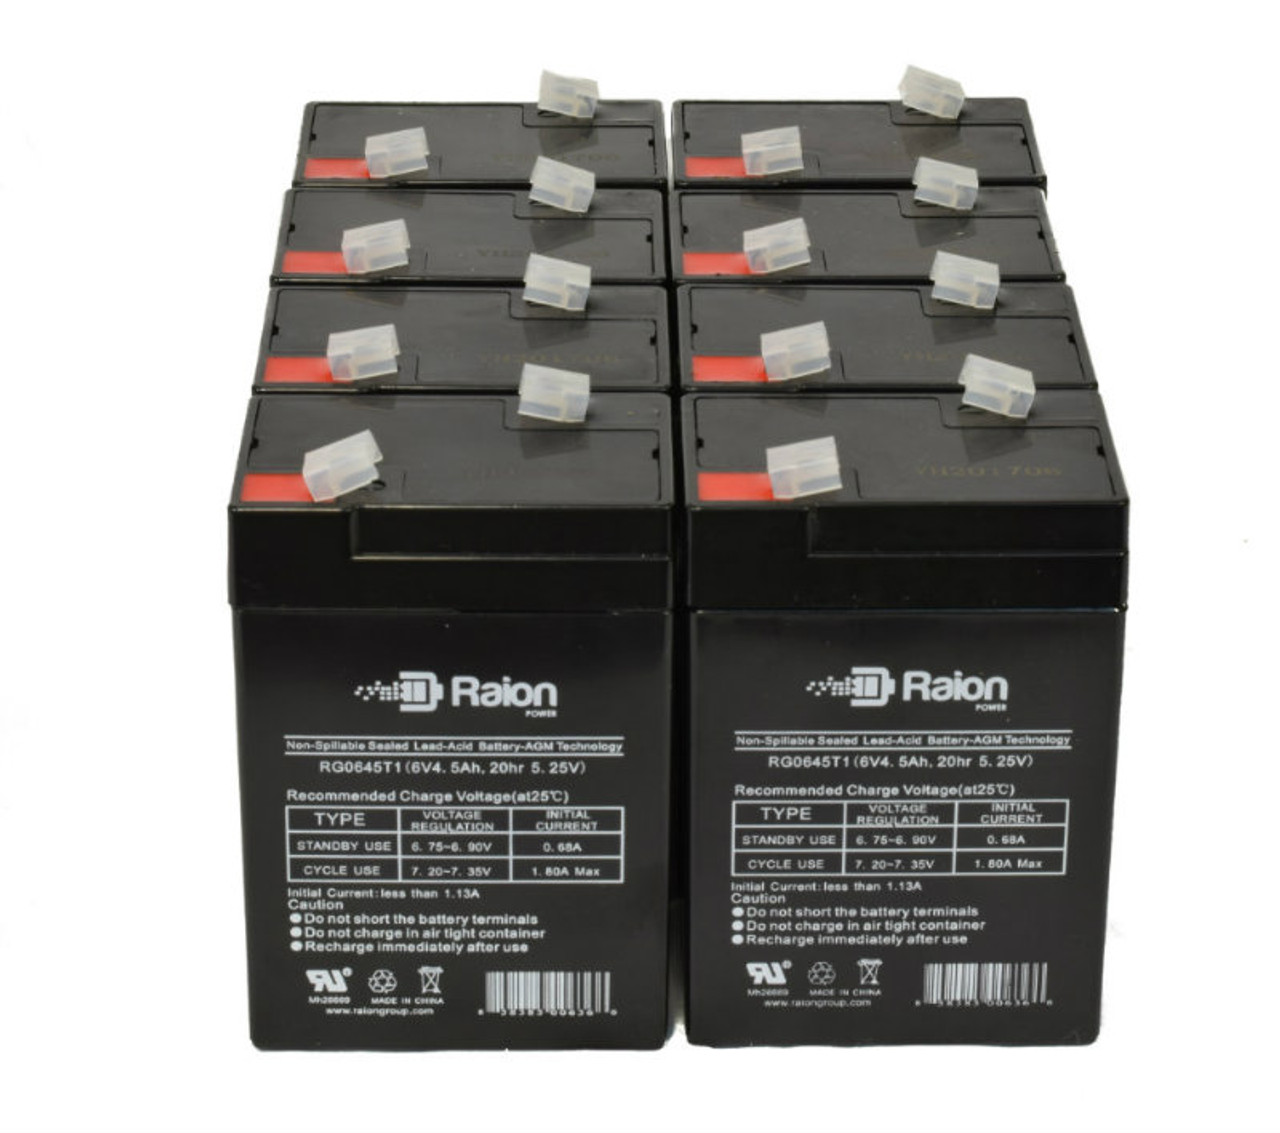 Raion Power 6V 4.5Ah Replacement Emergency Light Battery for Lithonia ELM2 Series - 8 Pack